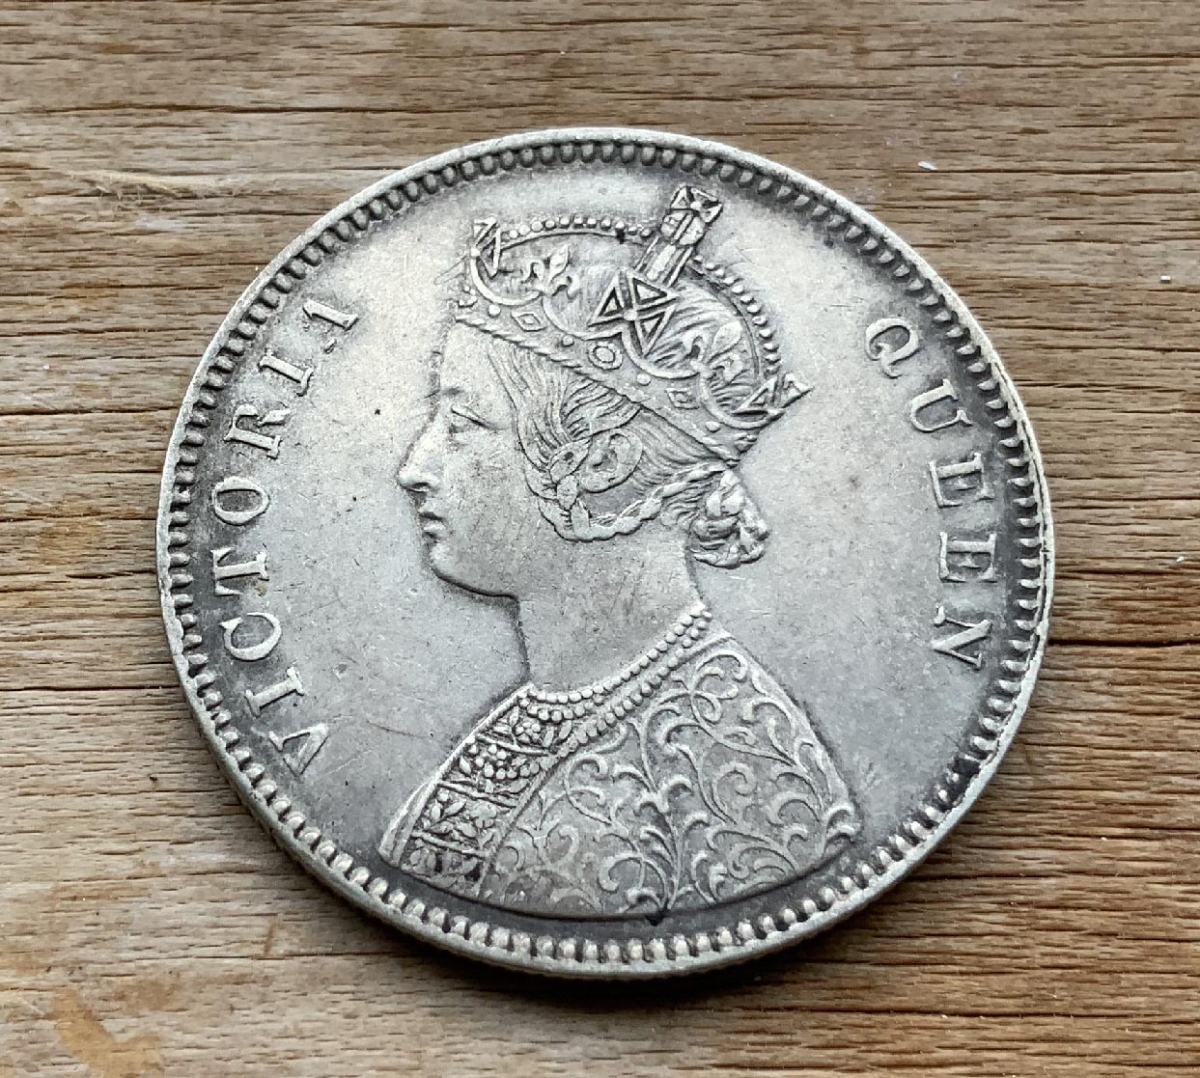 1862 Indian 1 Rupee .917 silver coin C275